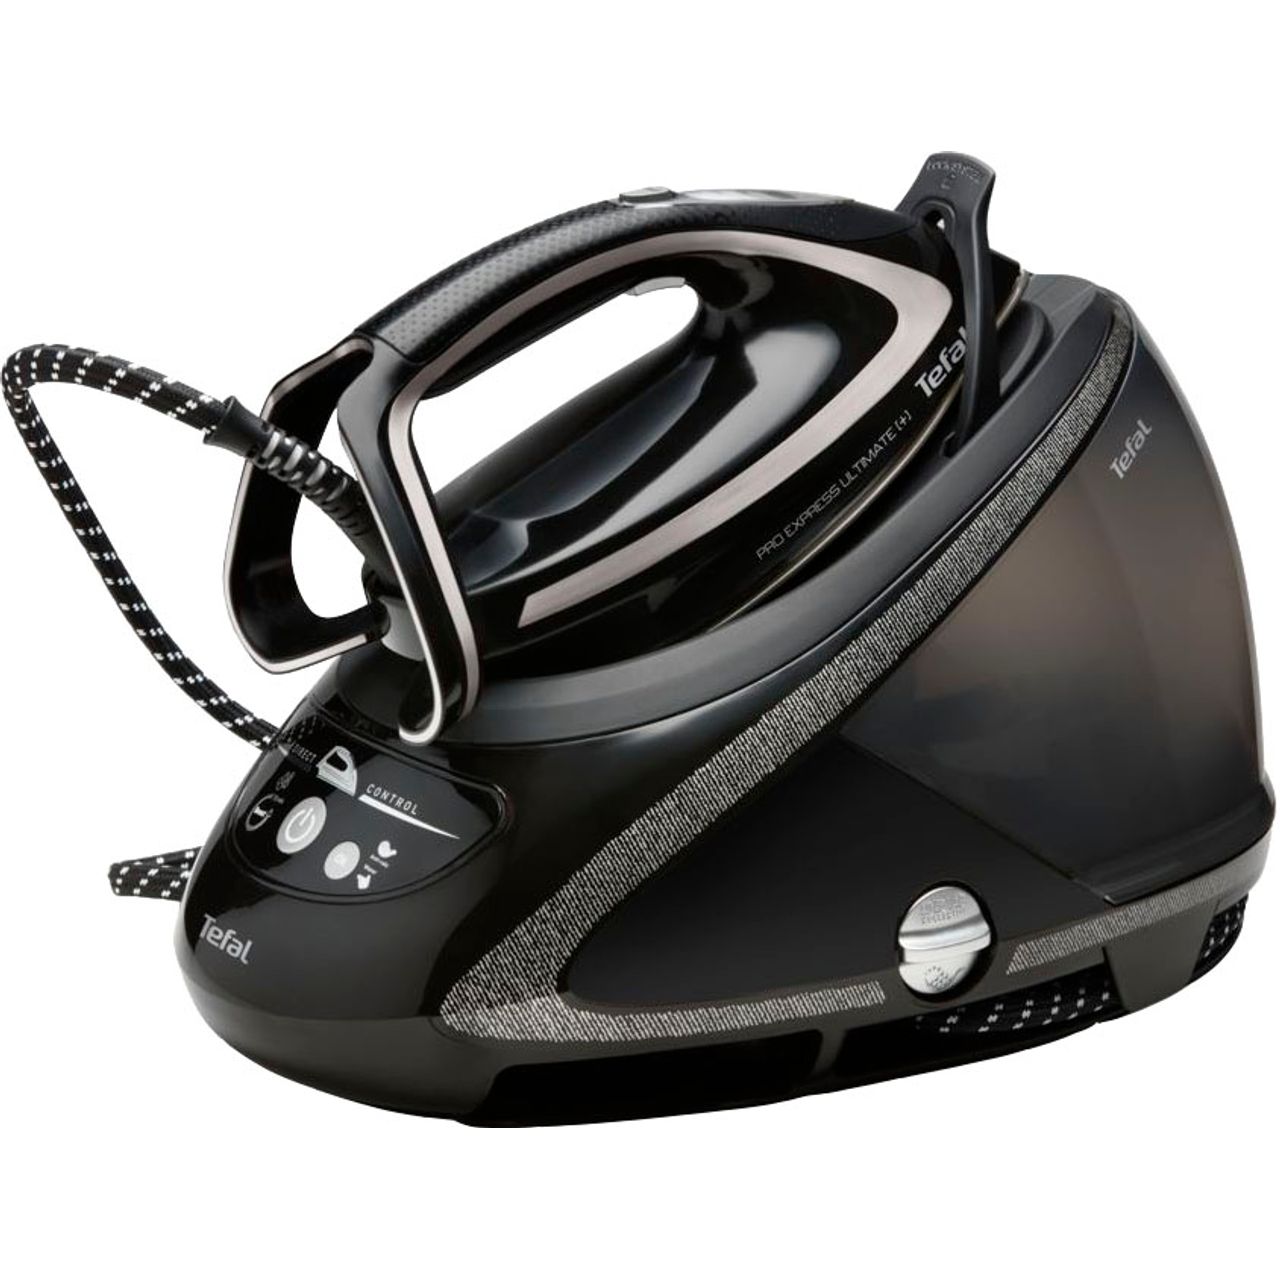 Tefal Pro Express Ultimate + GV9610 Pressurised Steam Generator Iron Review